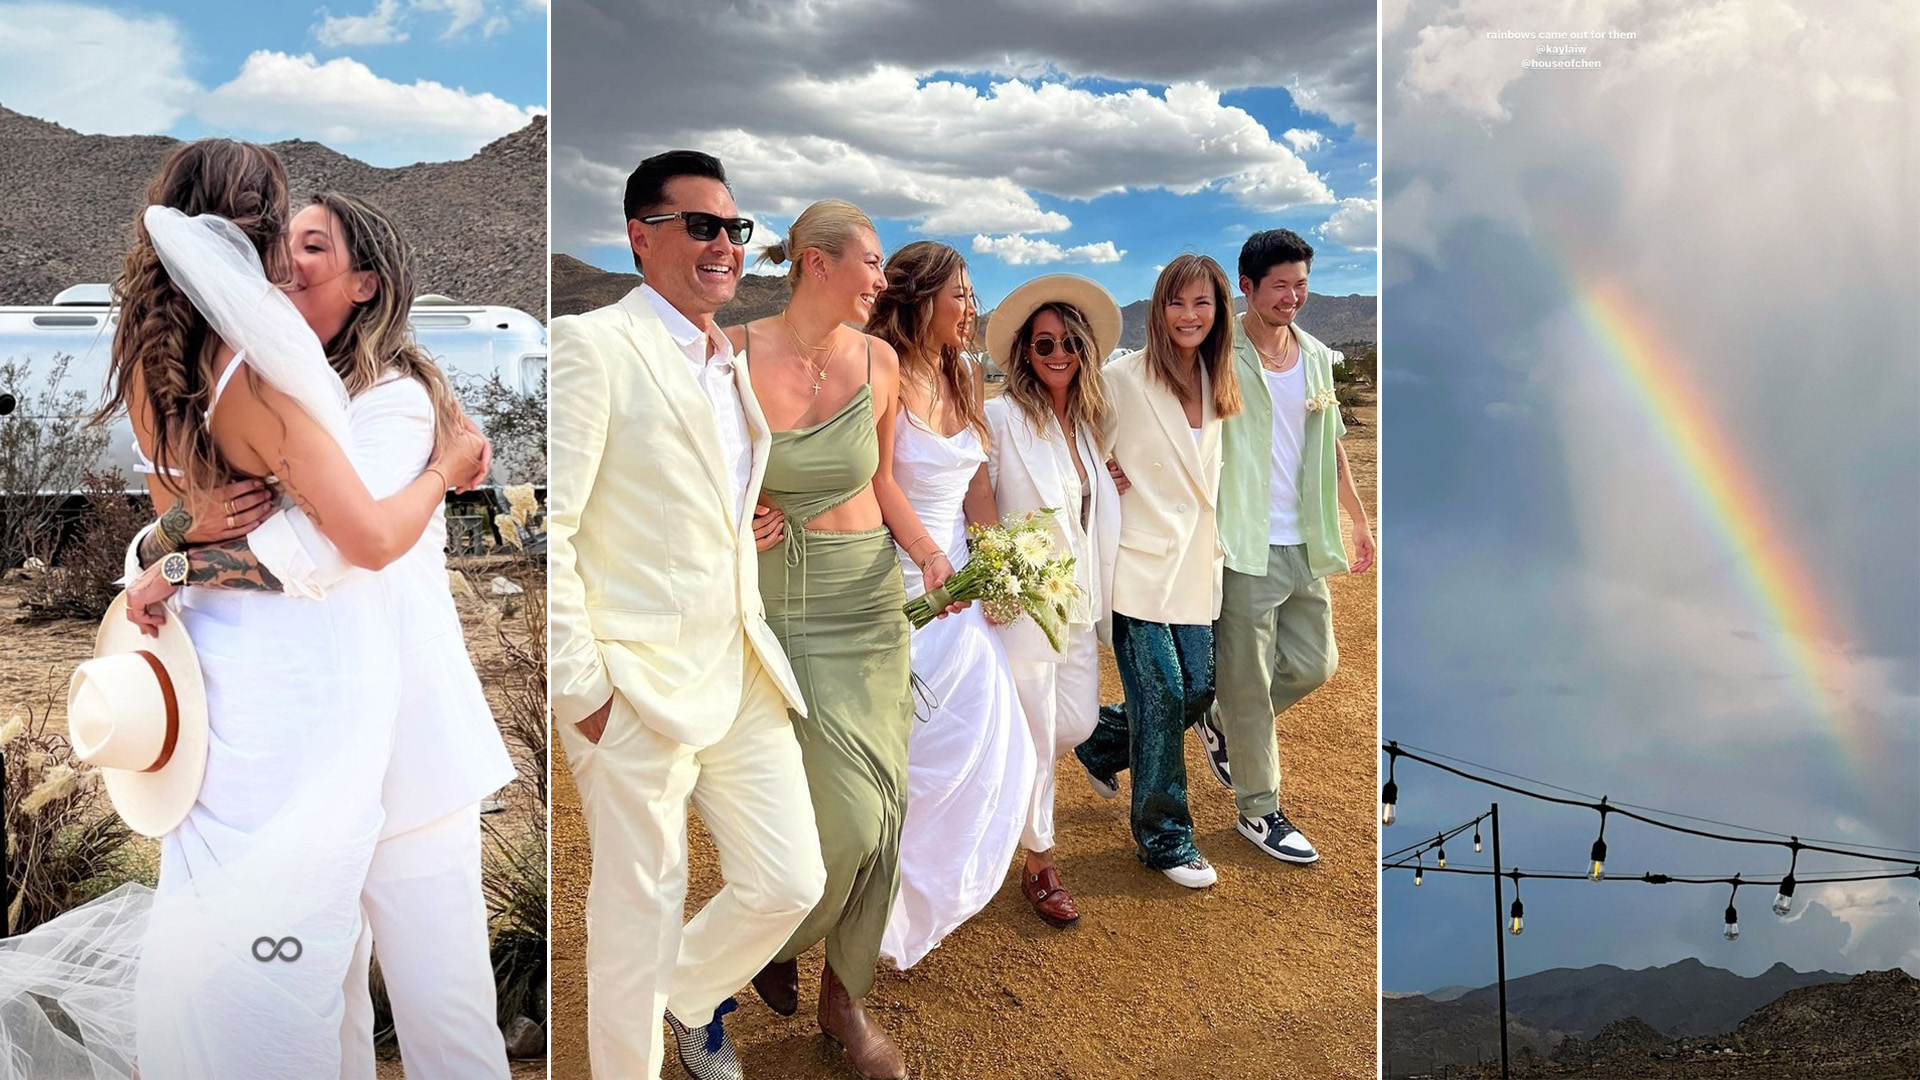 Michael Wongs Eldest Daughter Married Her Girlfriend In US And A “Rainbow Appeared For Them” pic